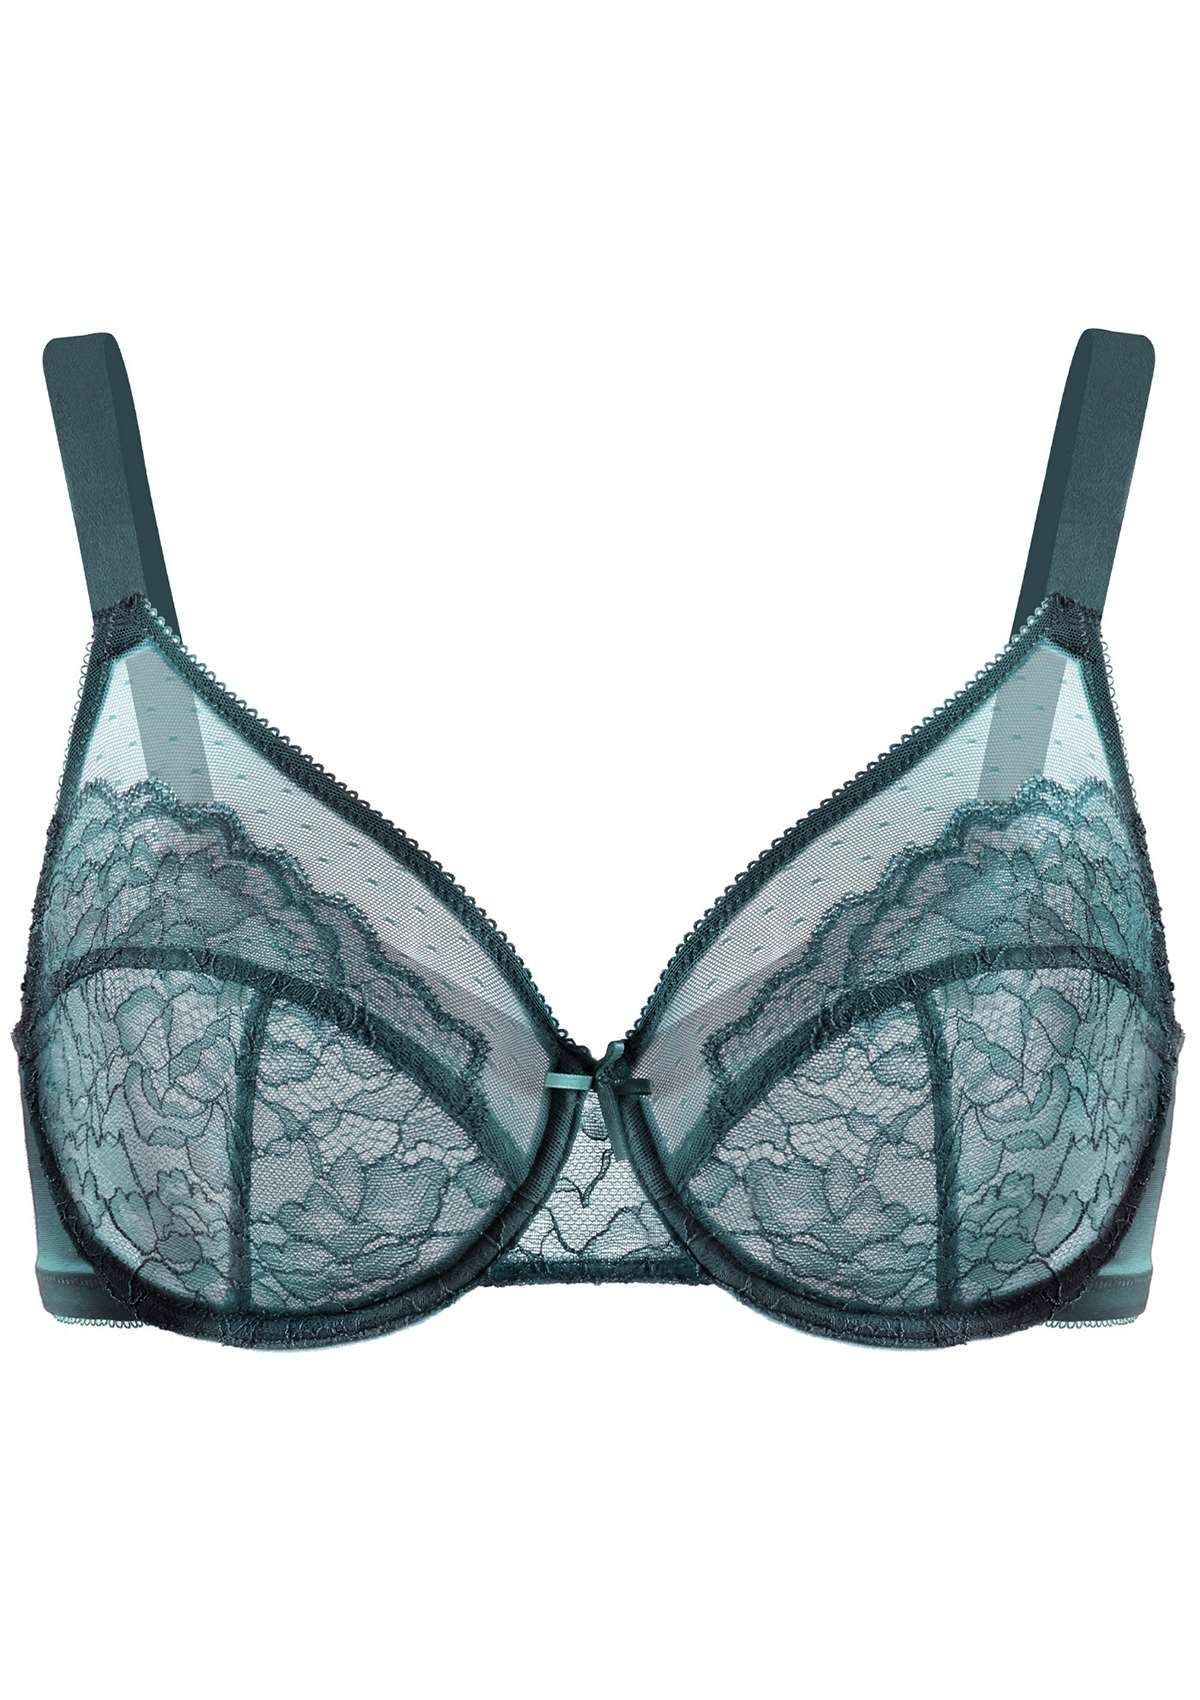 HSIA Enchante Full Coverage Bra: Supportive Bra For Big Busts - Balsam Blue / 38 / D